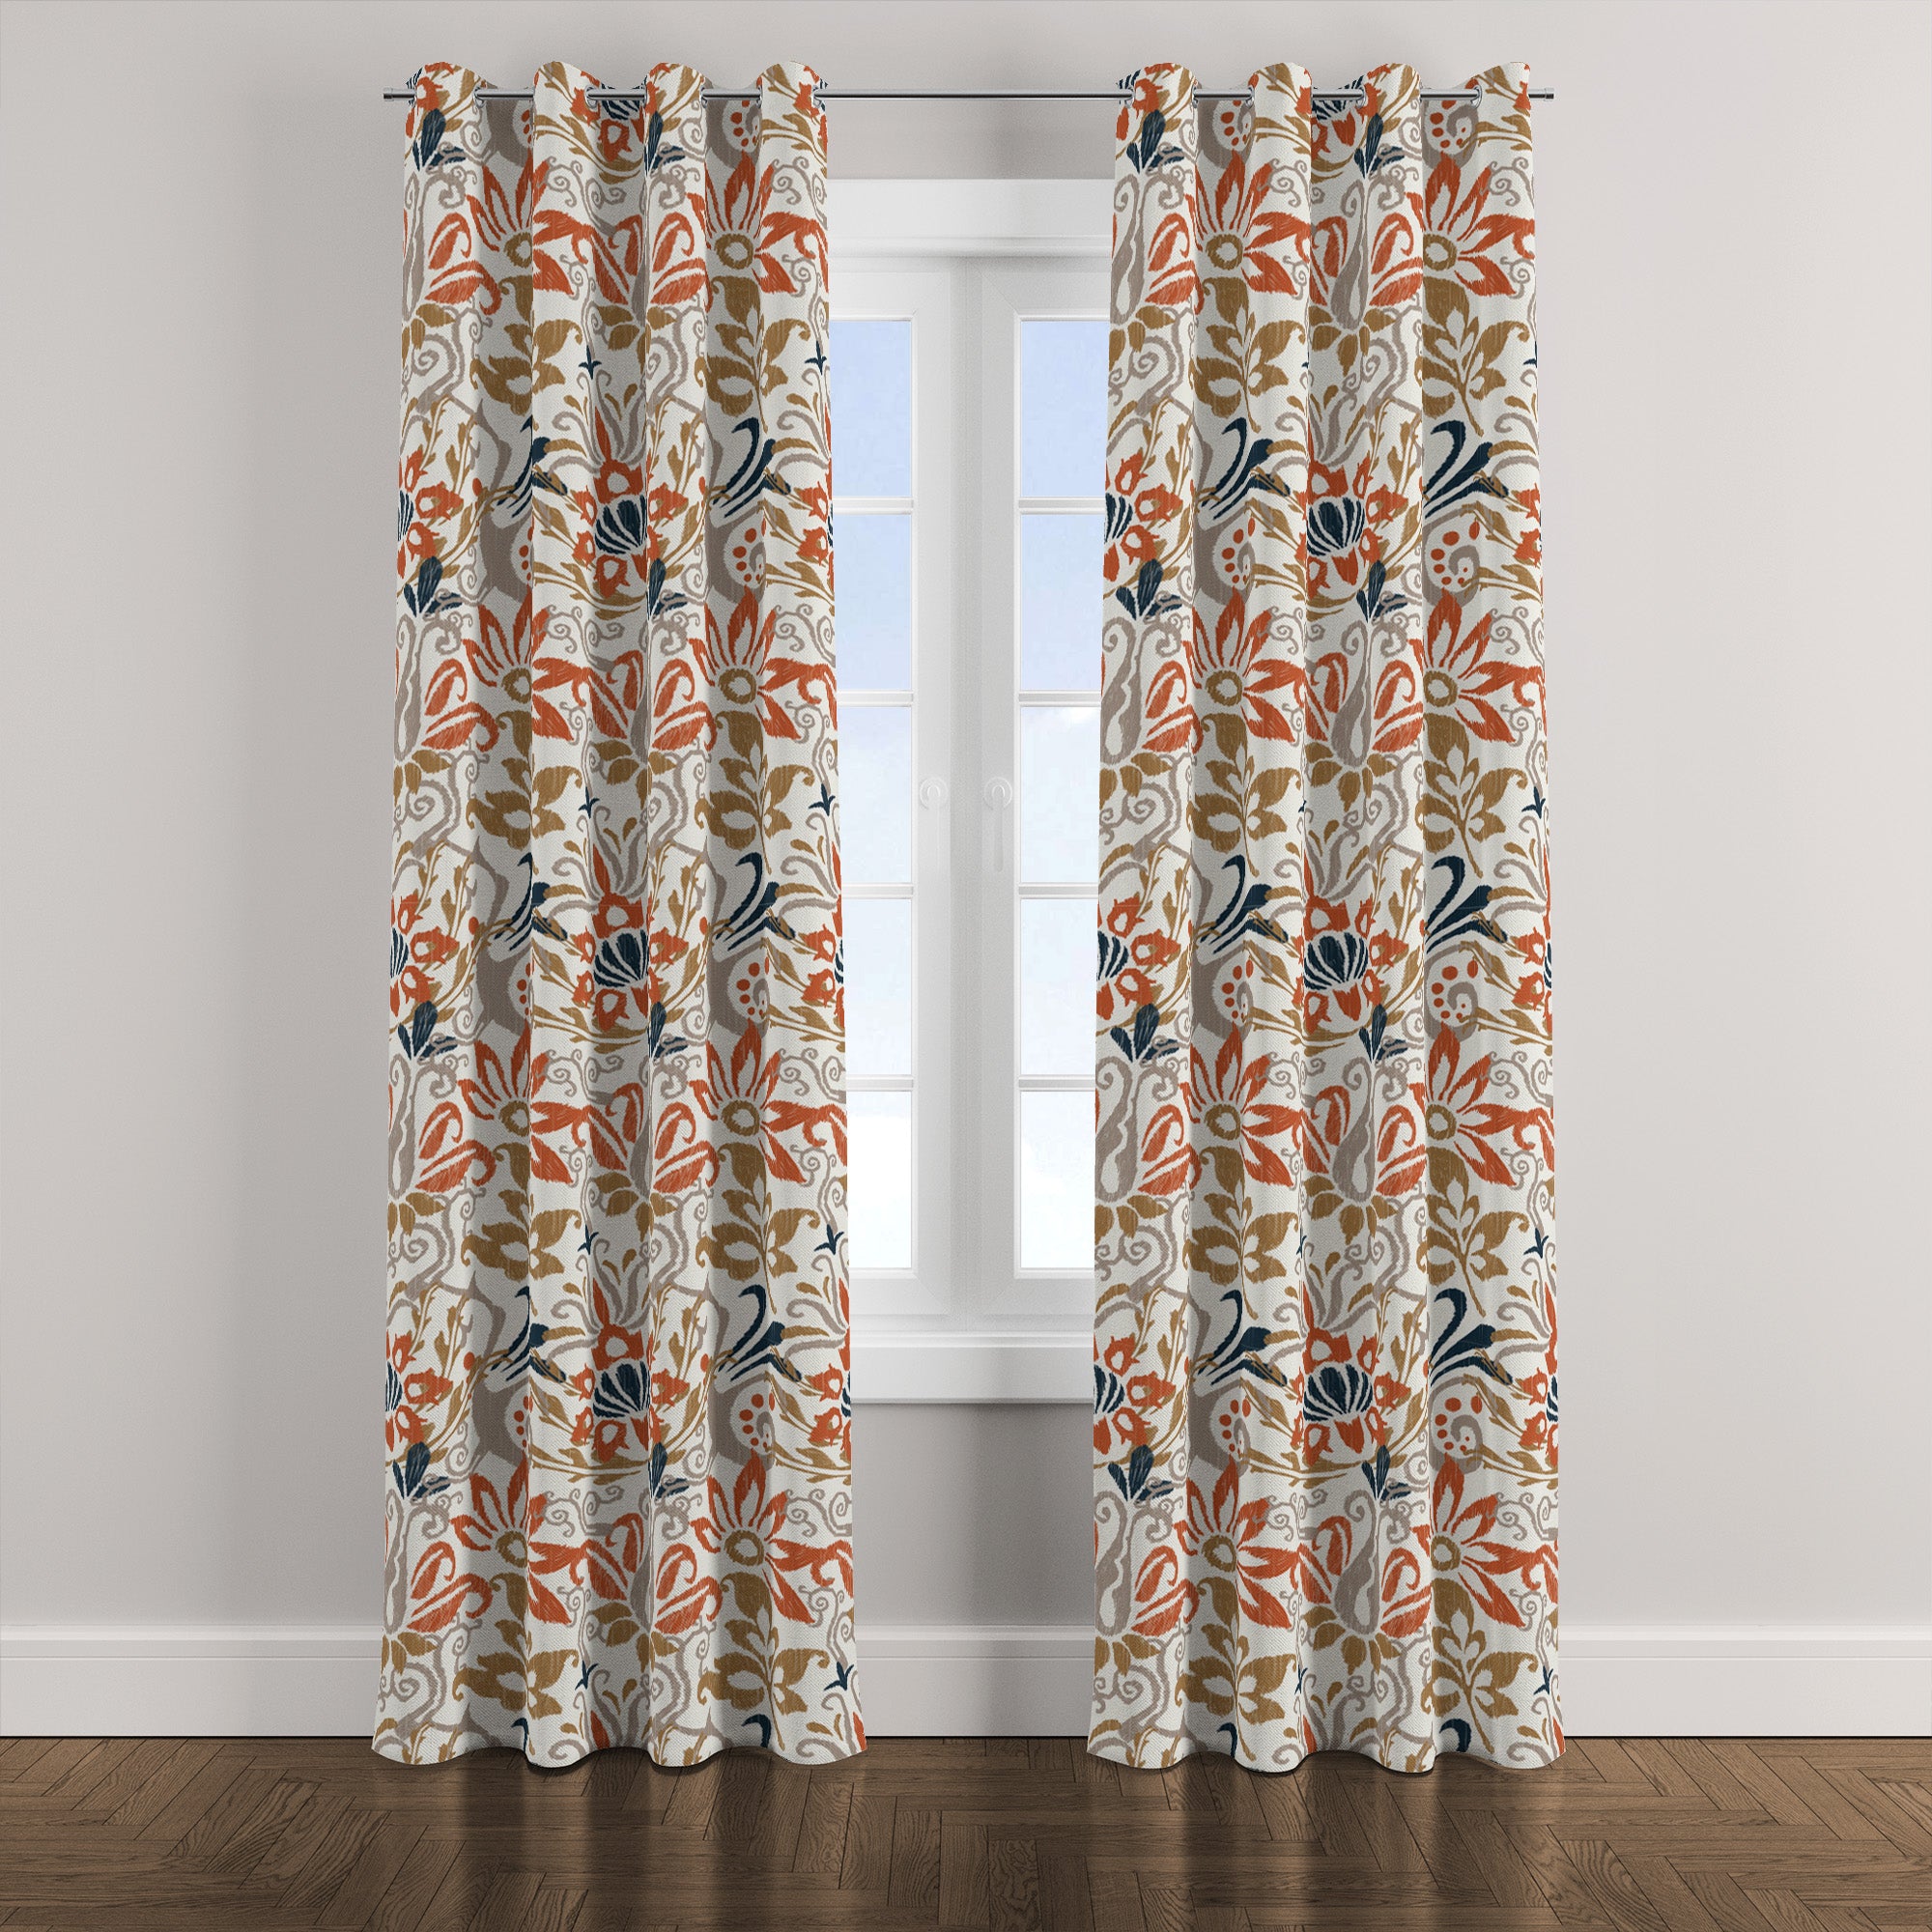 Ikat Floral Embroidery Ethnic Oriental Blackout Window Curtain PAISLEY